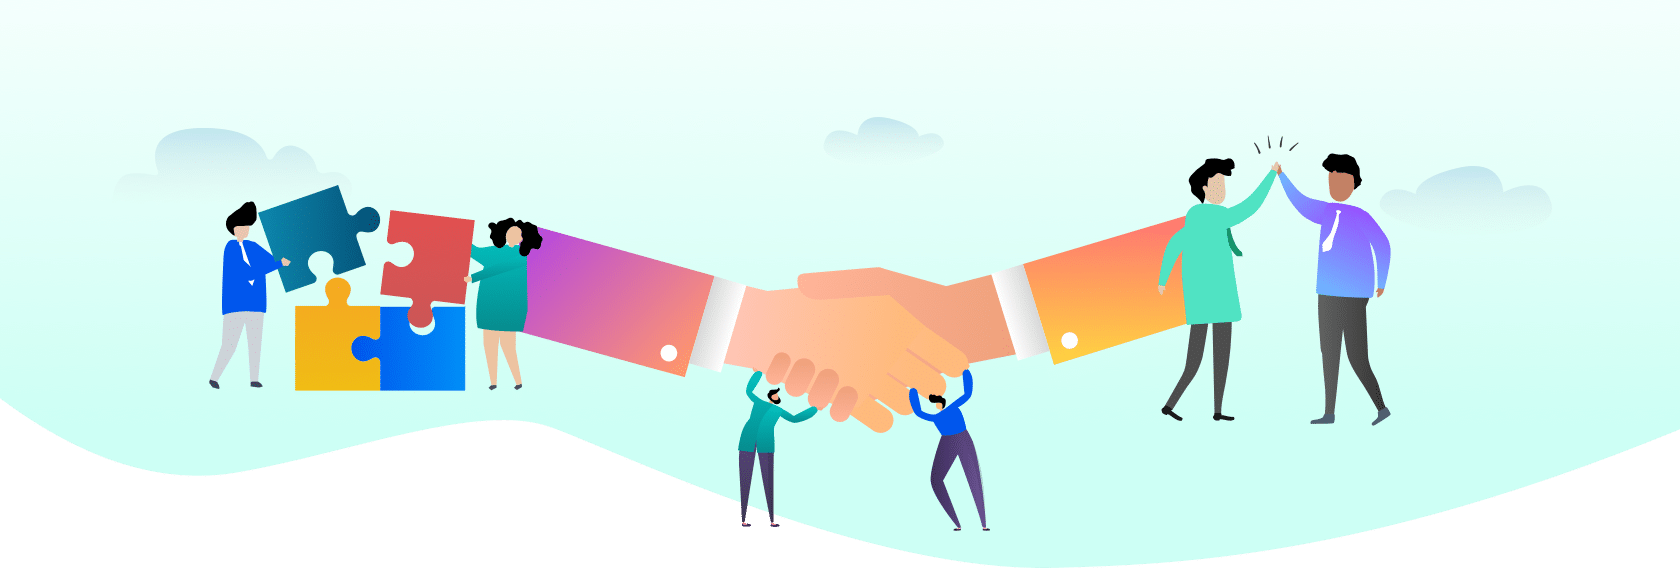 Illustration of two shaking hands, being held up by two individuals on each side